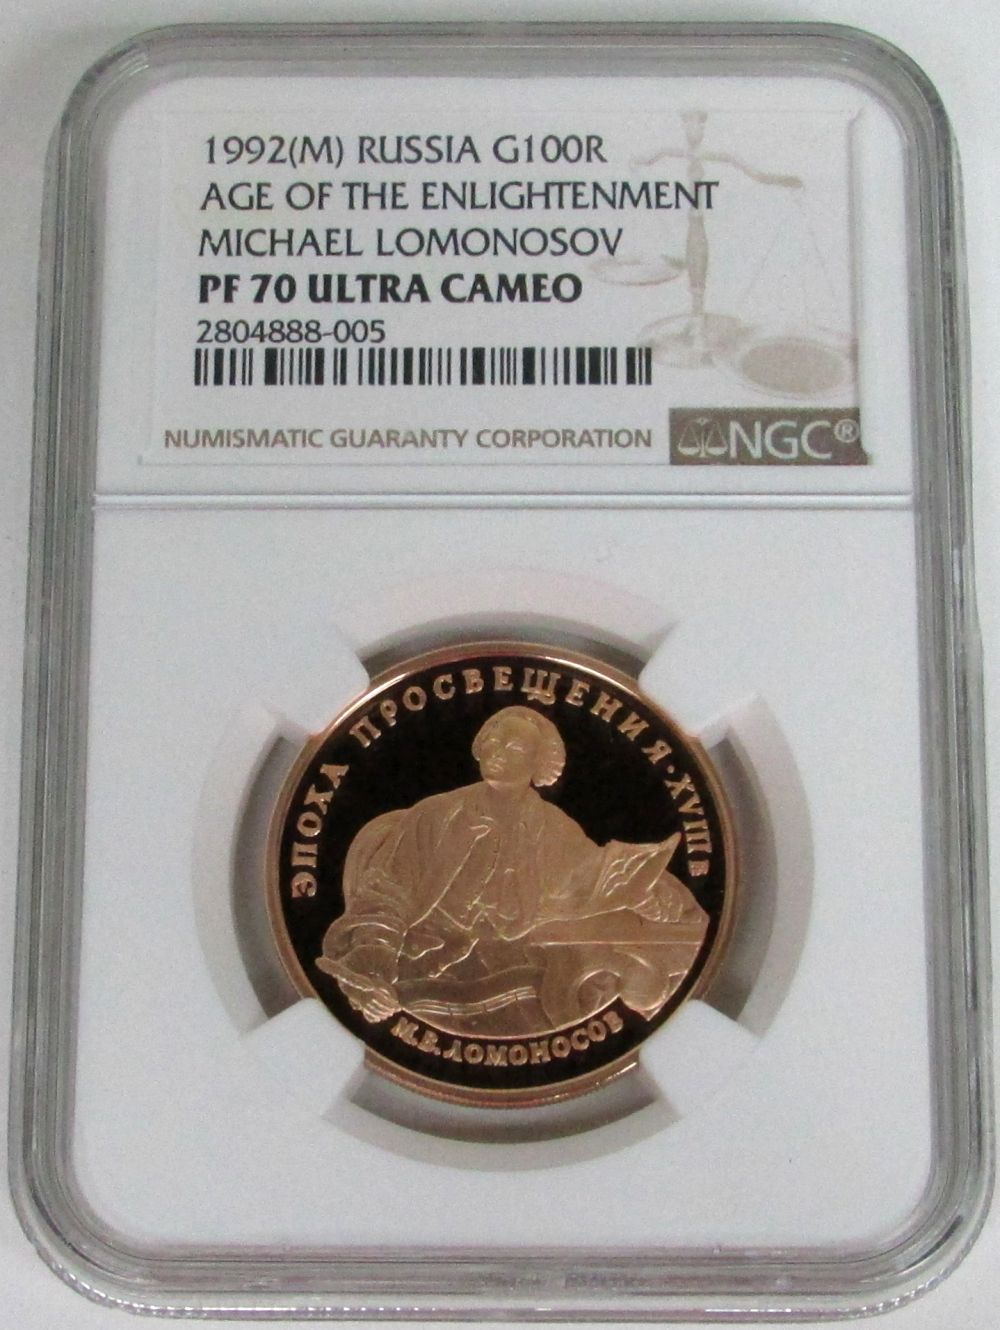 1992 GOLD RUSSIA 100 ROUBLES MICHAEL LOMONOSOV NGC PERFECT PROOF 70 ULTRA CAMEO AGE OF ENLIGHTENMENT